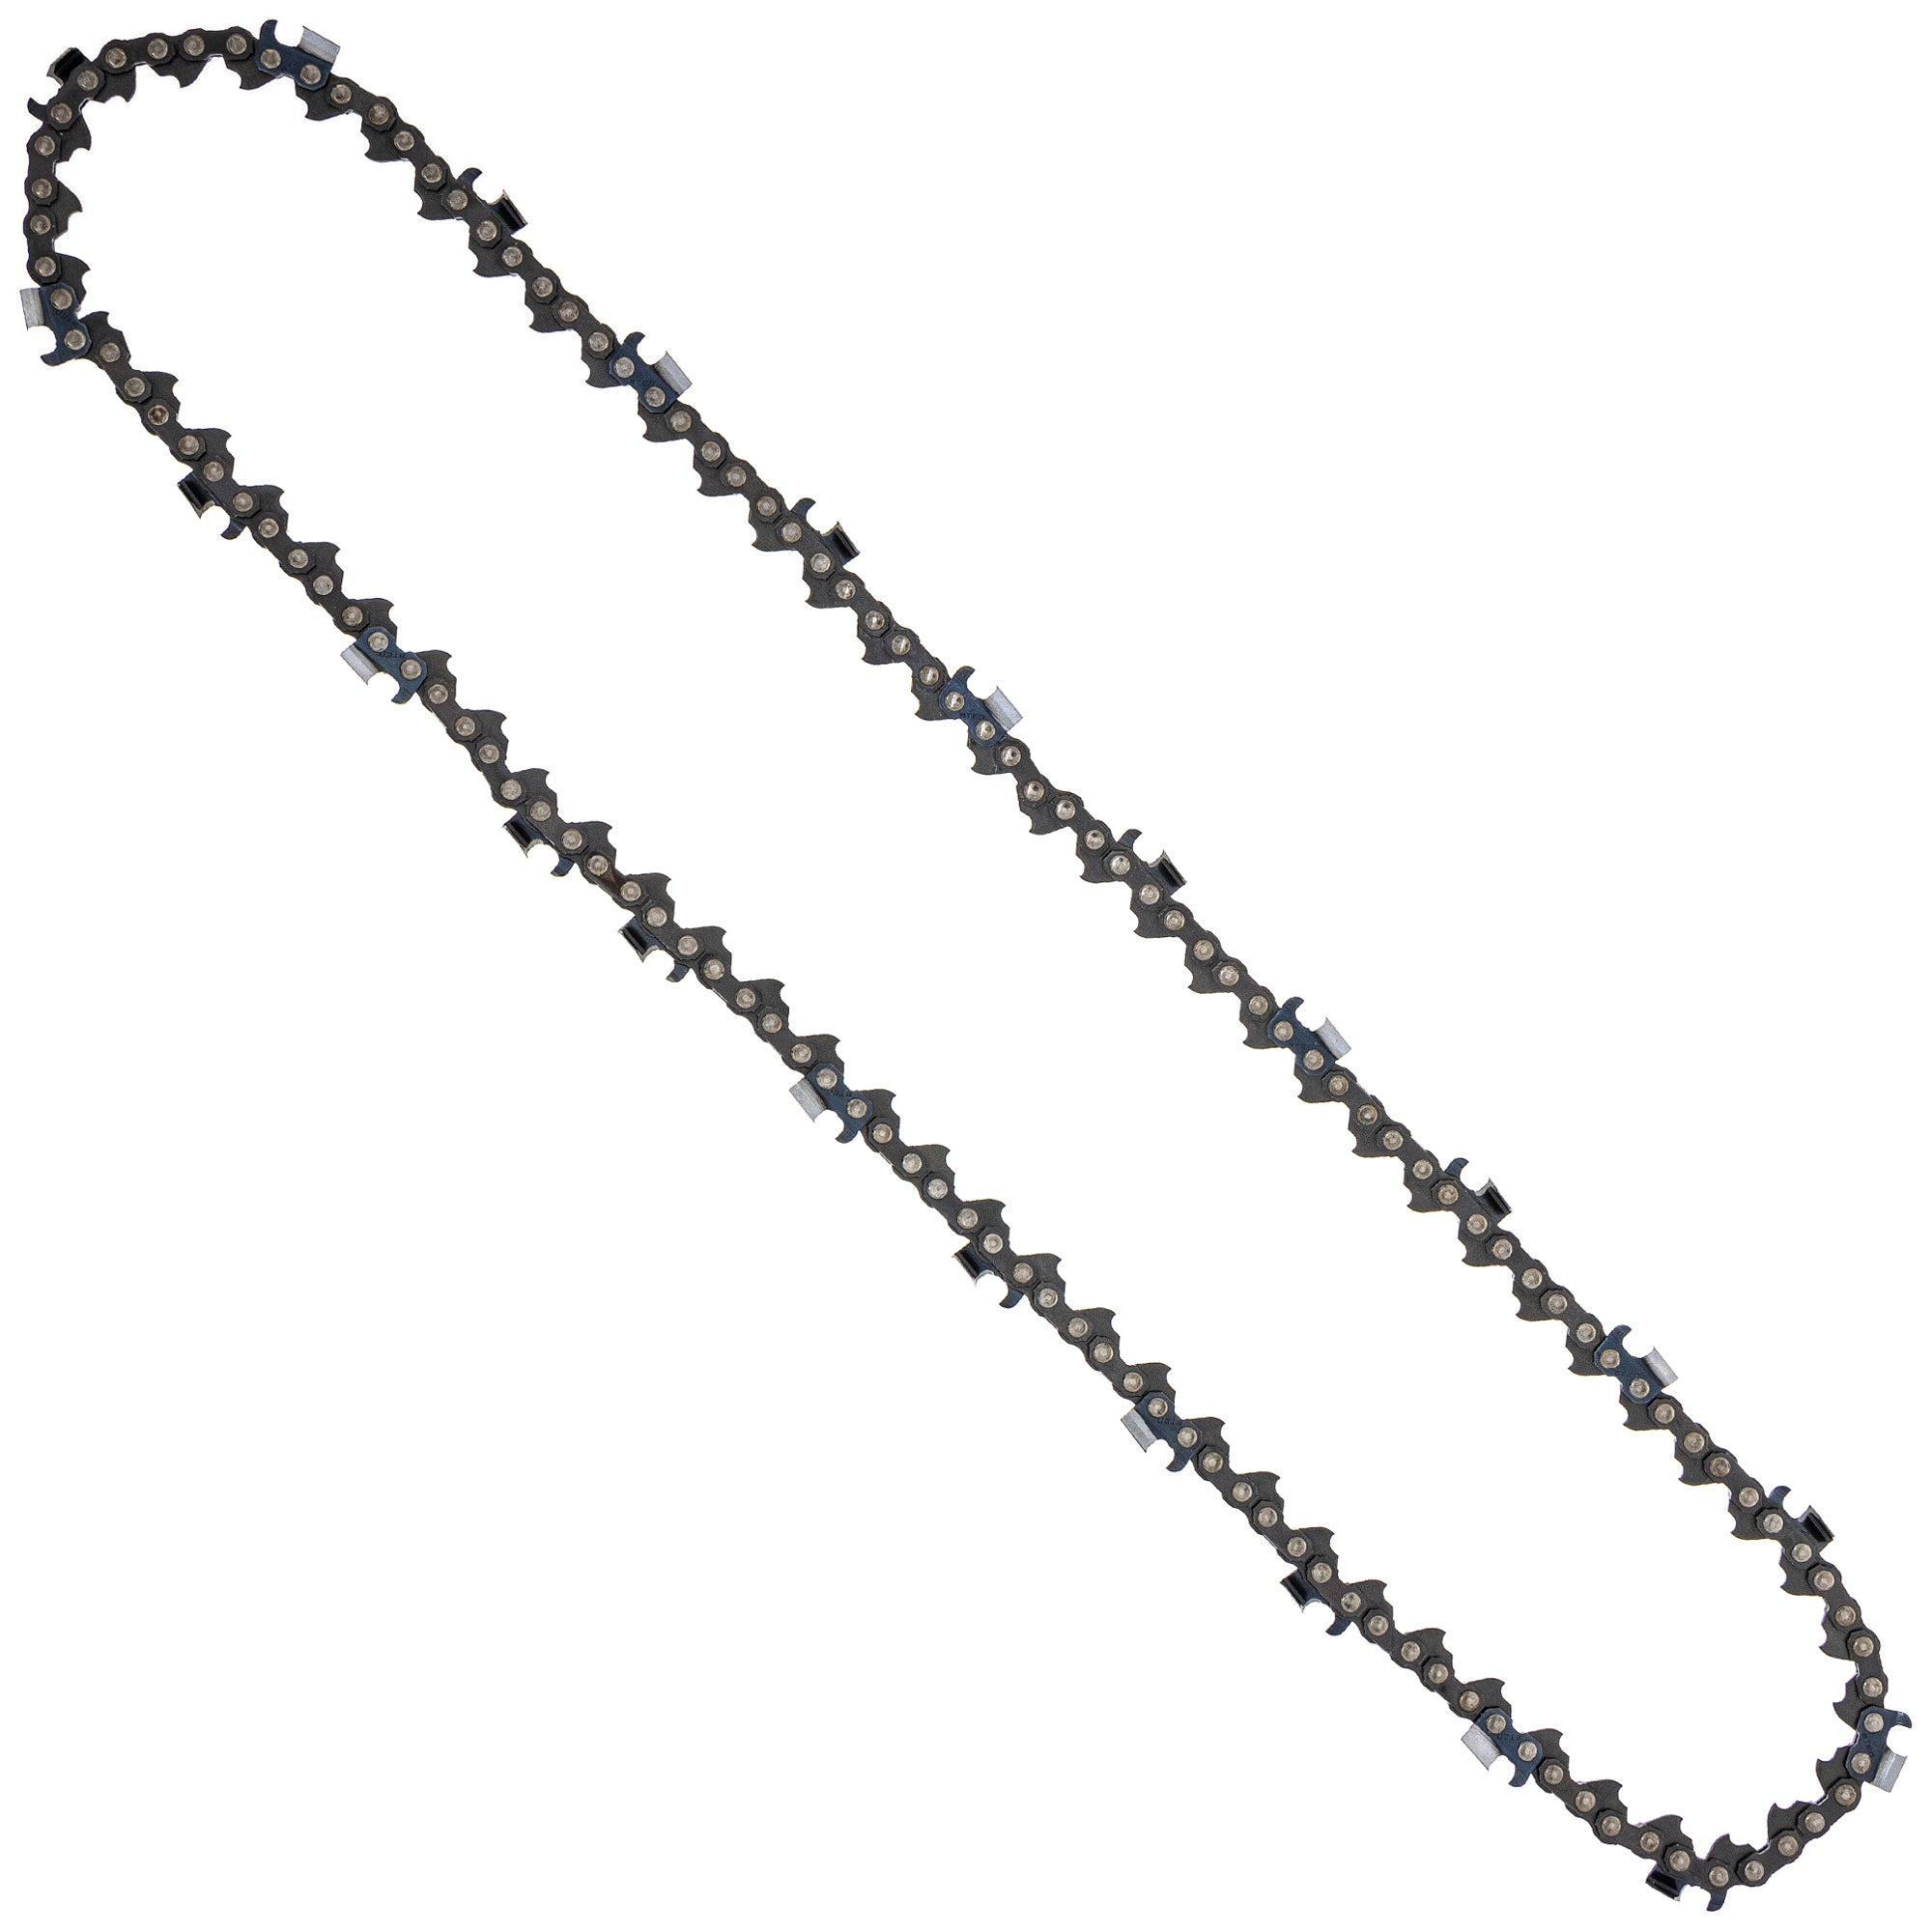 8TEN 810-CCC2392H Chain 6-Pack for zOTHER Oregon Husqvarna Poulan